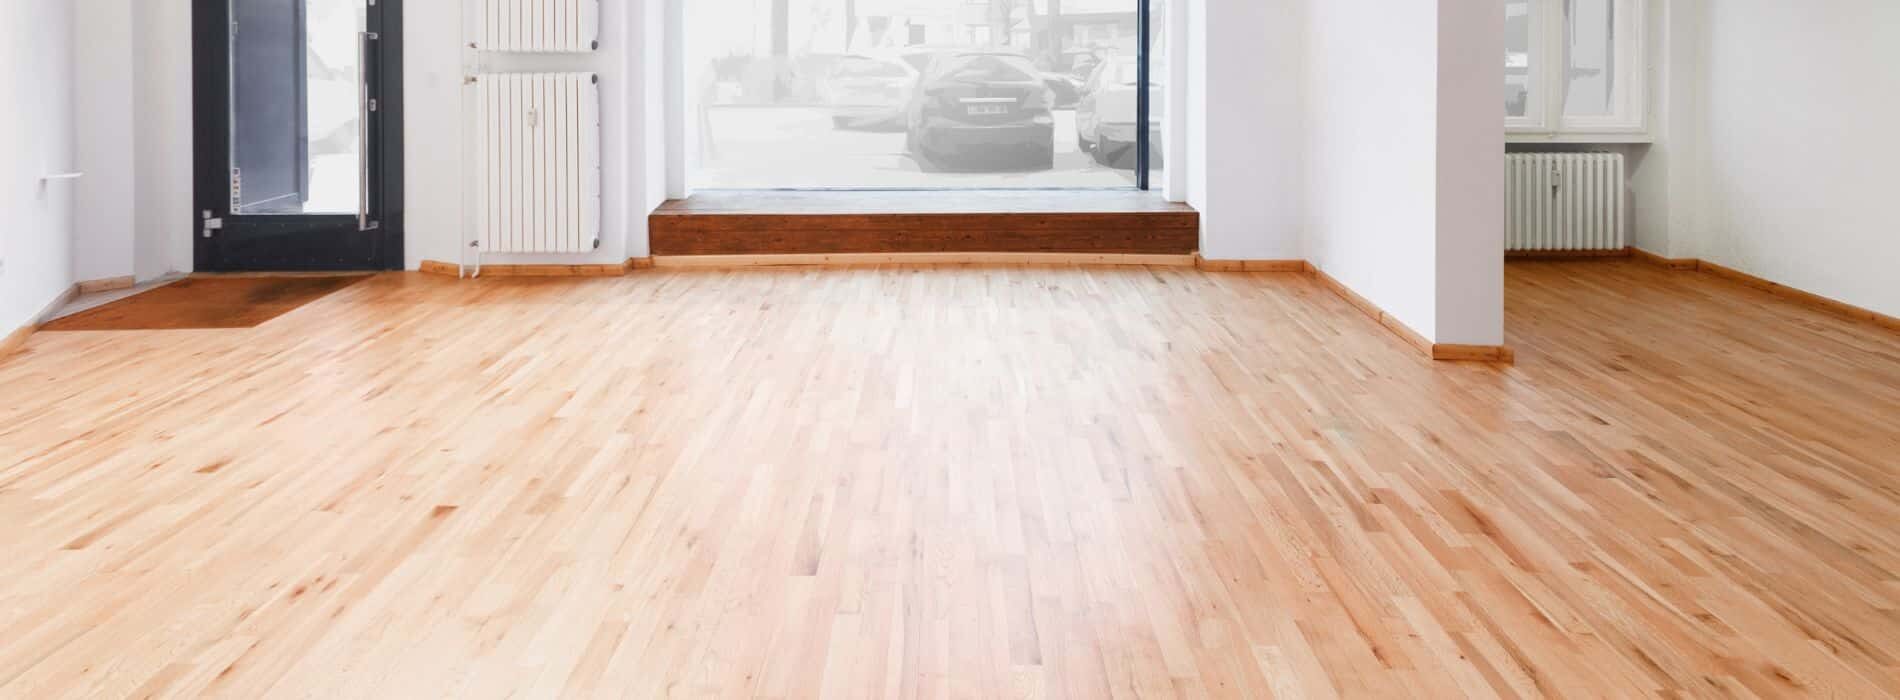 Flawless restoration of 5-year-old engineered oak floors by Mr Sander® in Perivale, UB6. Experience the breathtaking beauty of perfectly sanded and stained floors, finished with Junckers Strong for long-lasting protection.